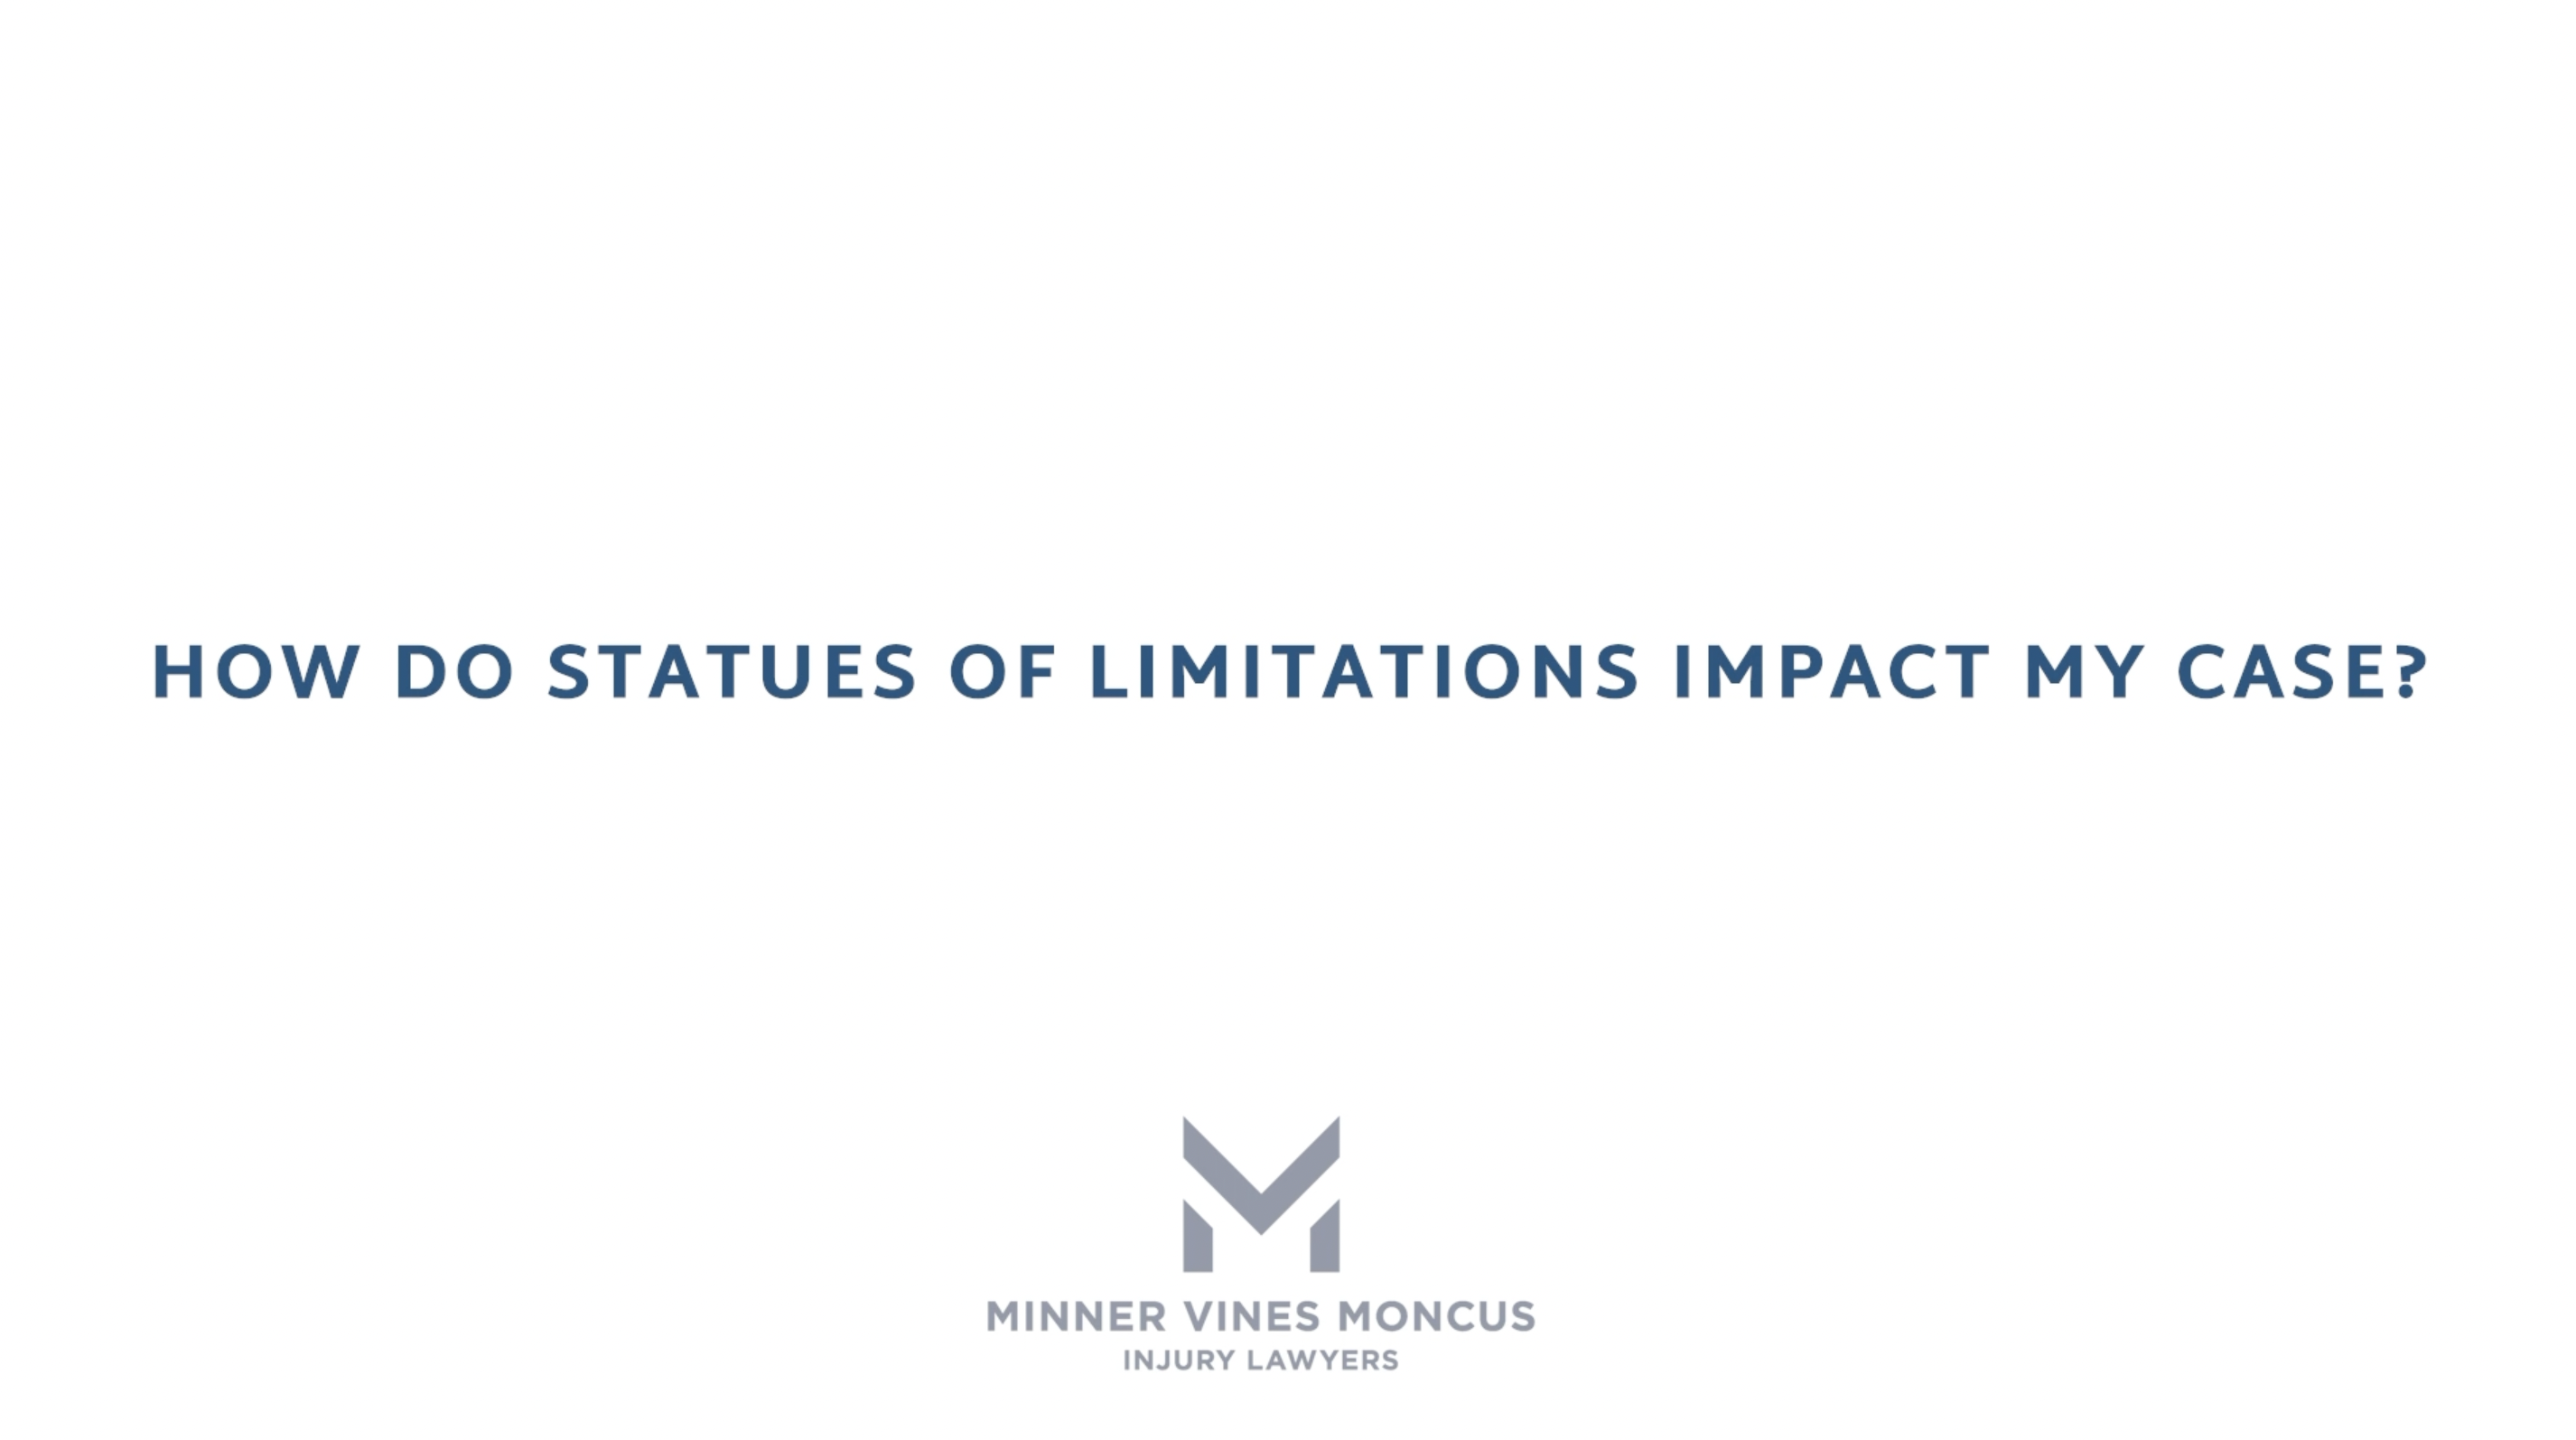 How do statues of limitations impact my case?